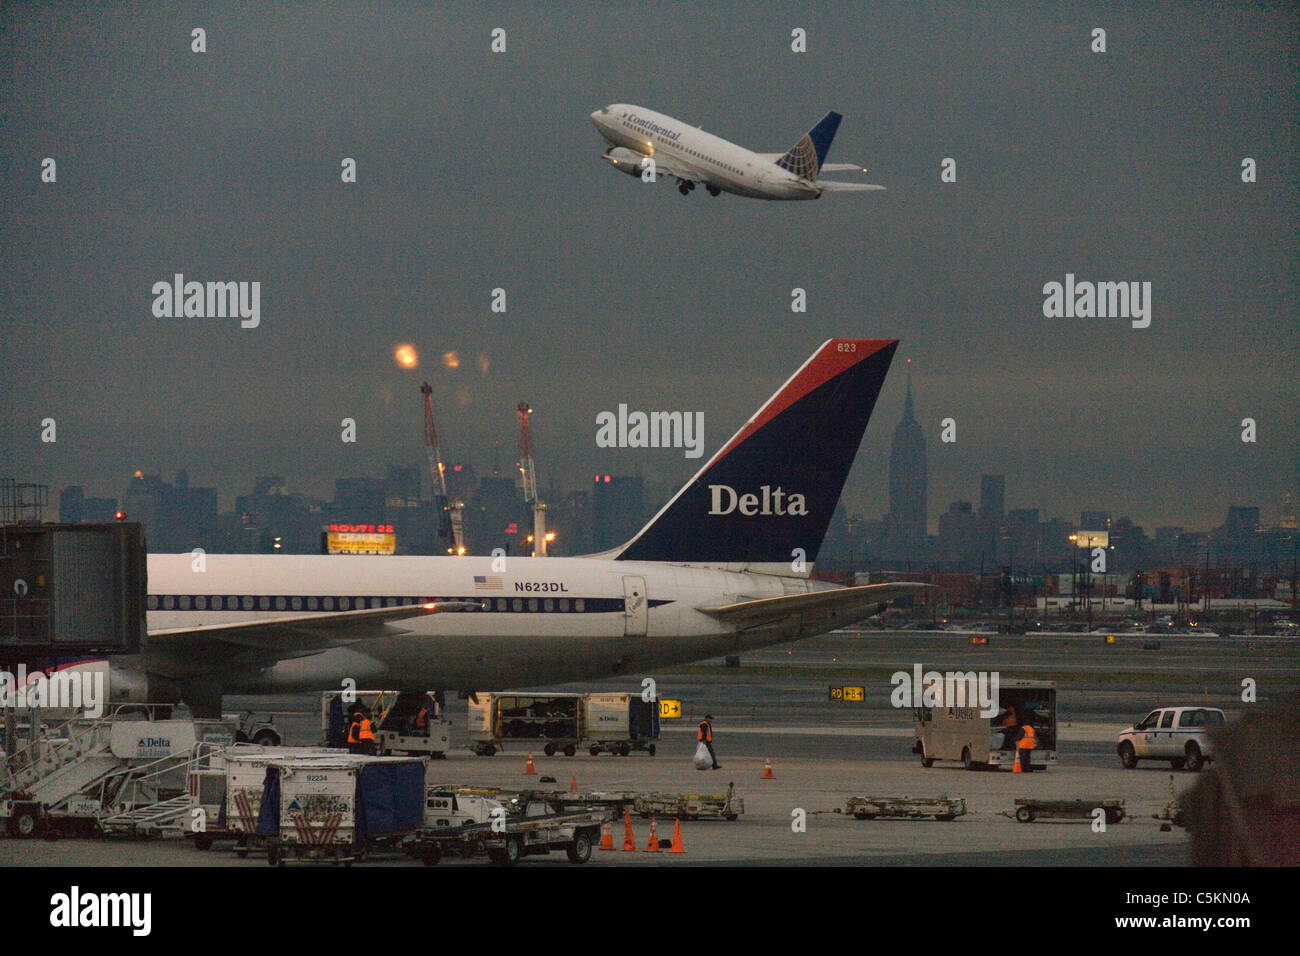 Plane at gate, plane climbing and Empire State Building in distance, NJ Stock Photo